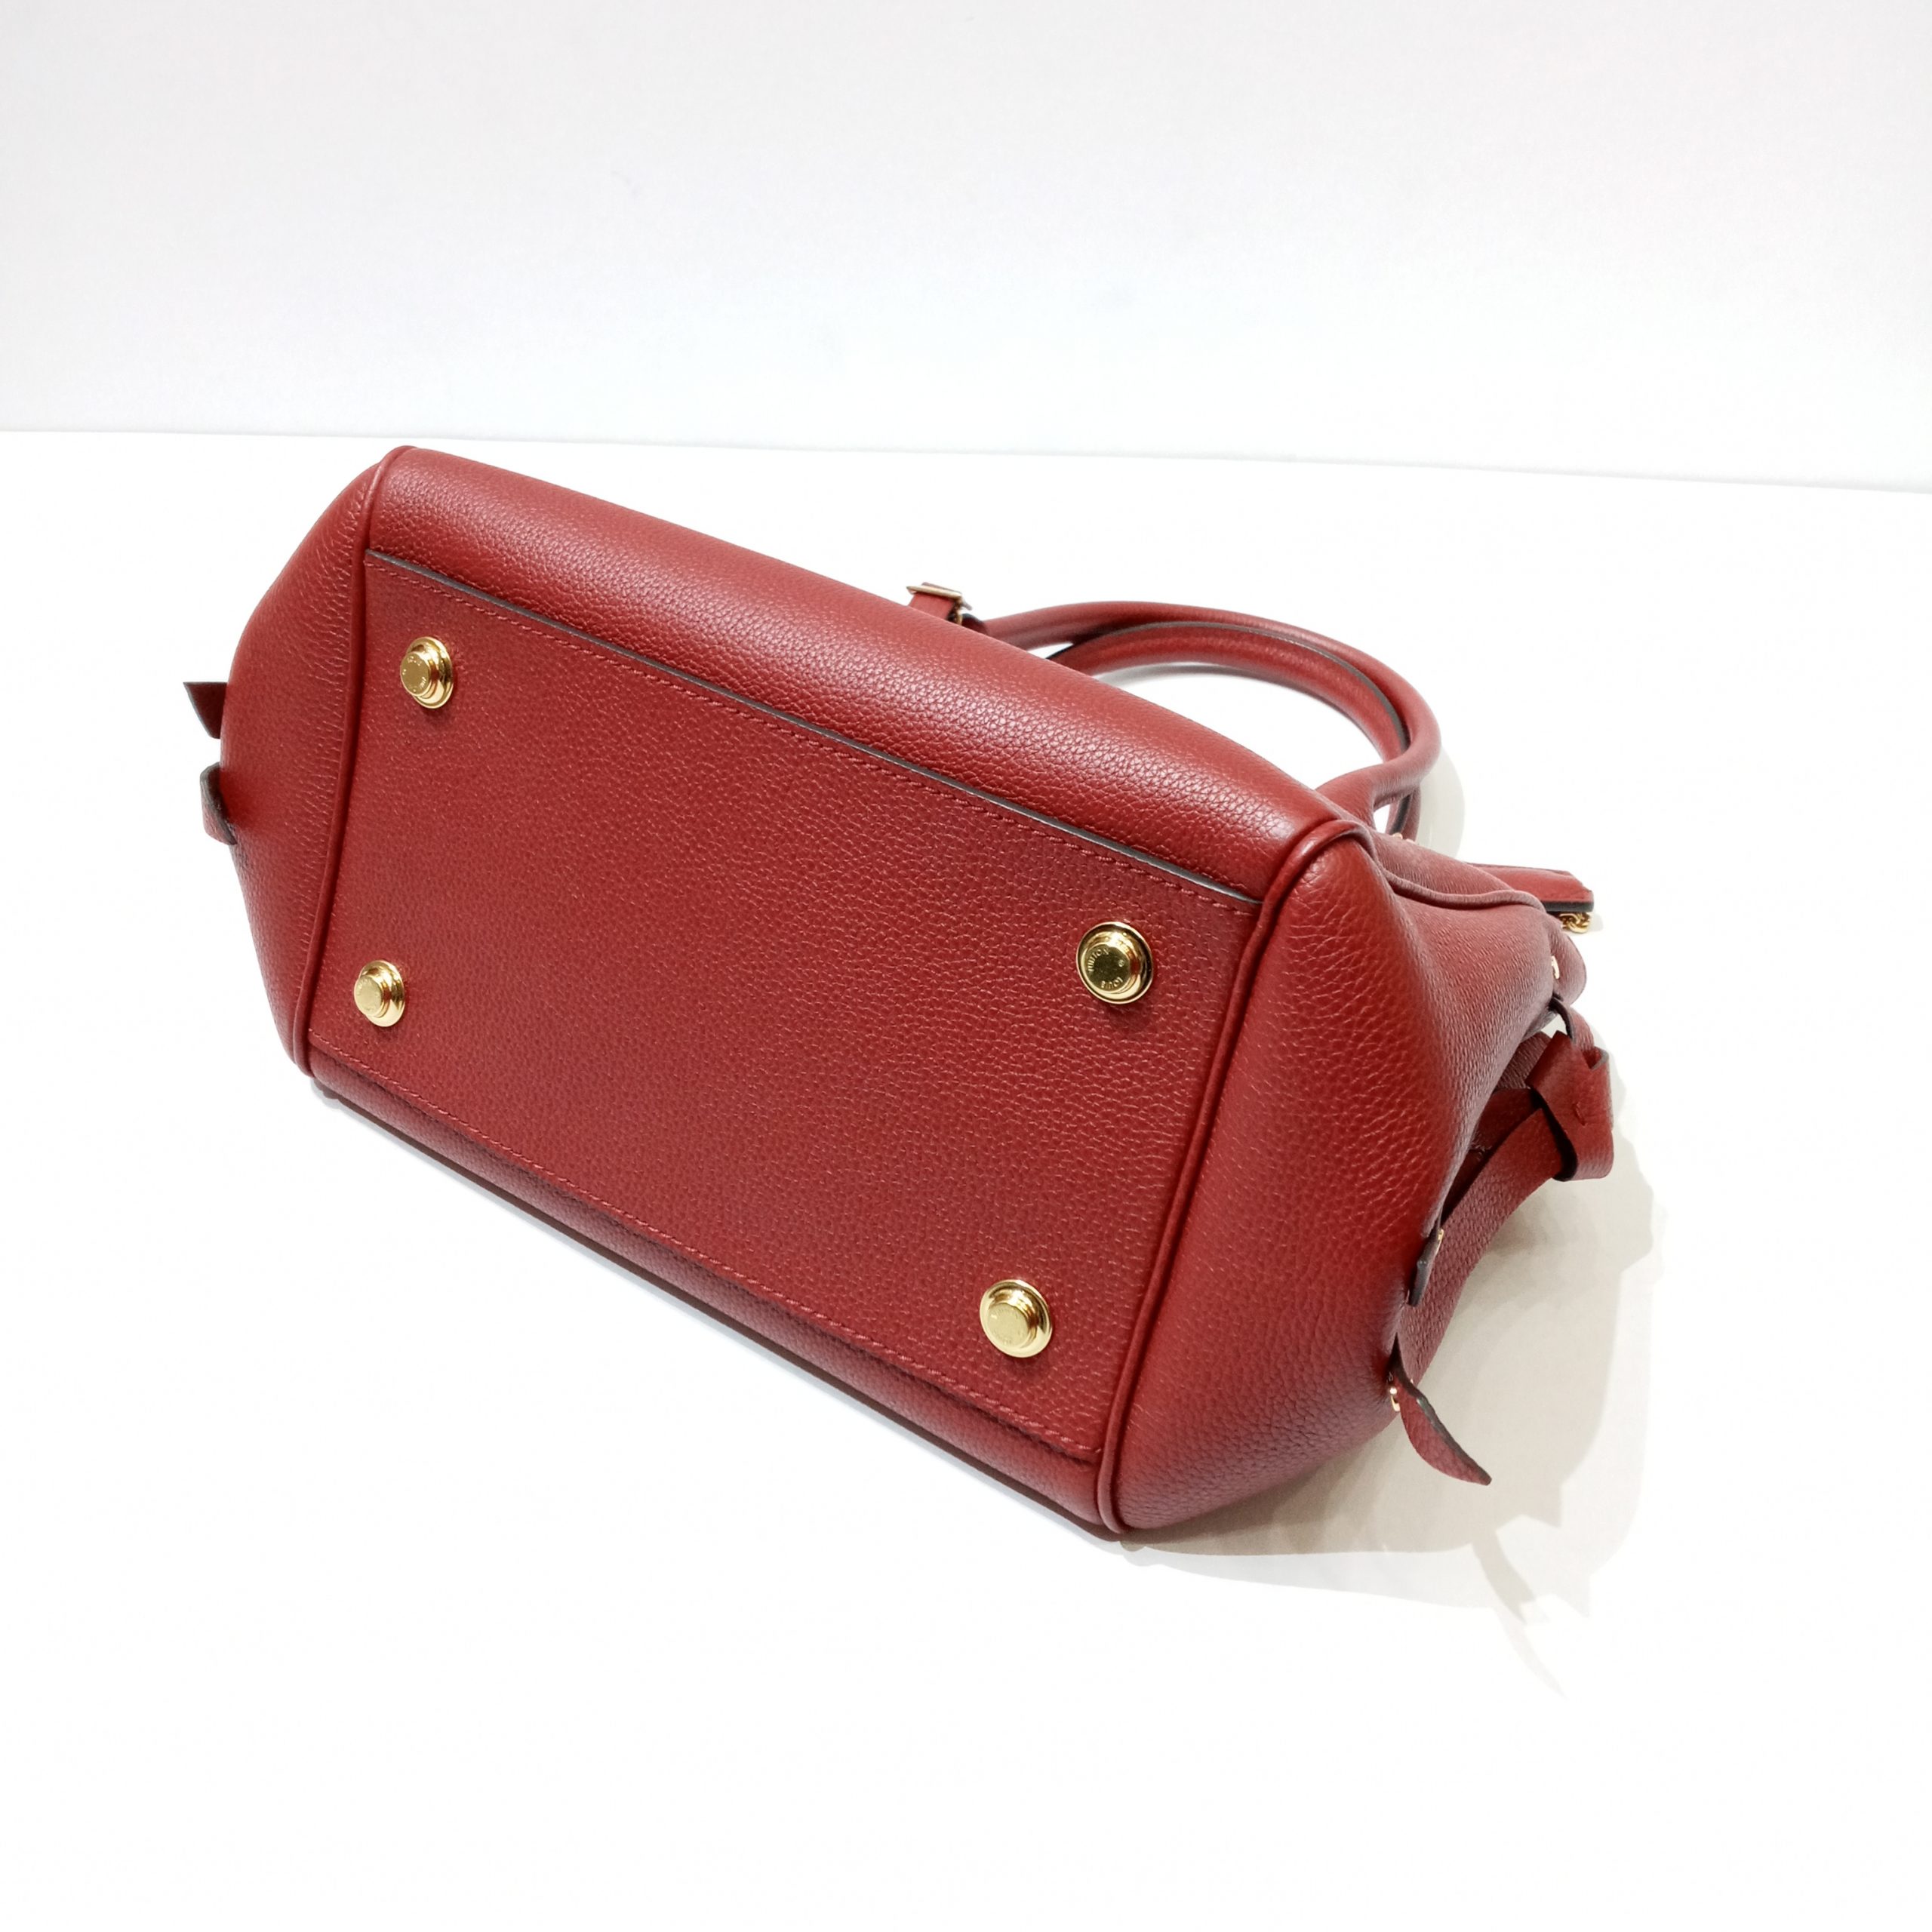 Louis Vuitton Milla PM, Red with Gold Hardware, Preowned in